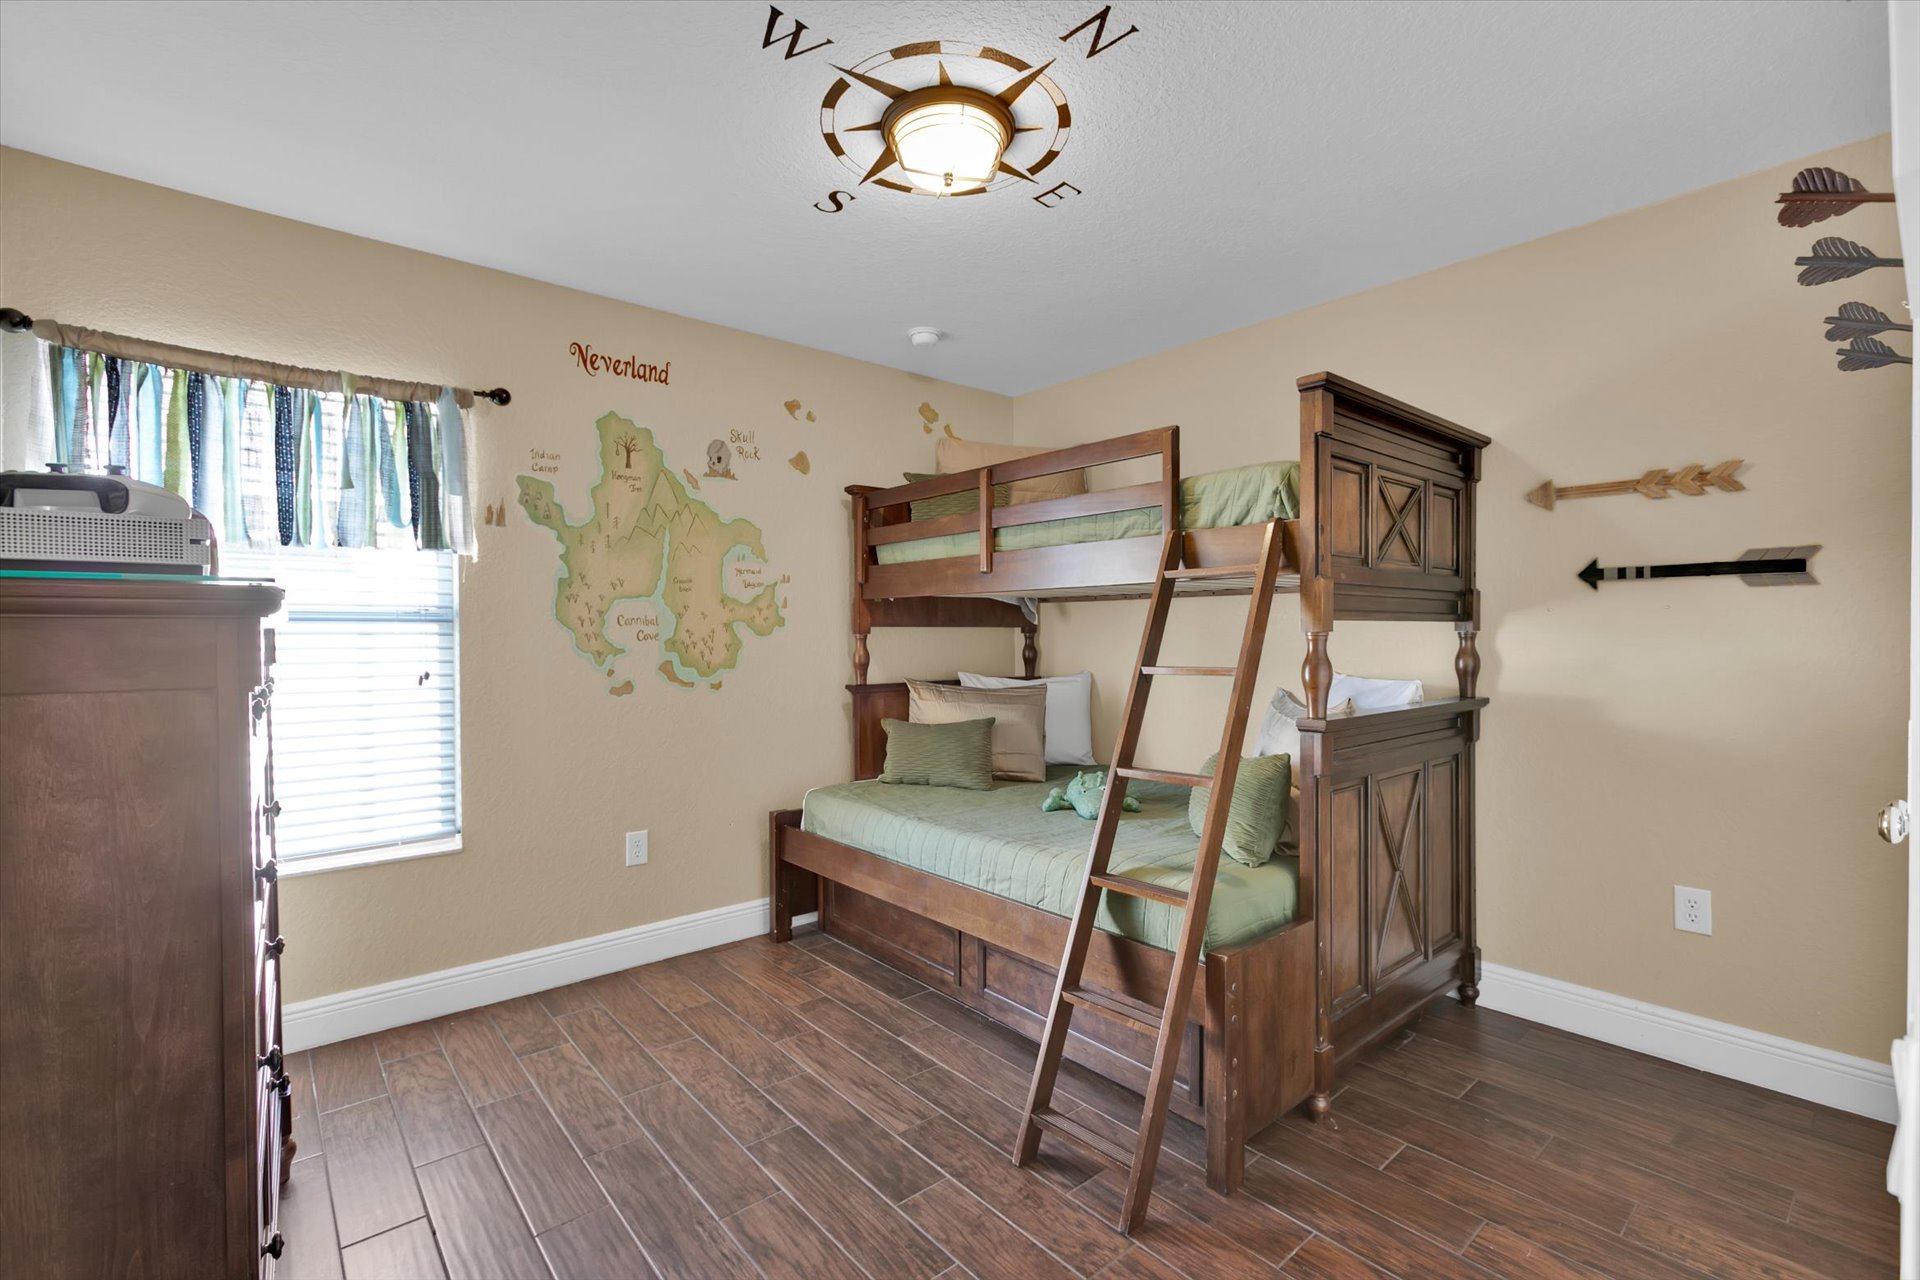 Twin/Double Bunk + Twin Trundle Bedroom 4 Upstairs
Peter Pan Theme